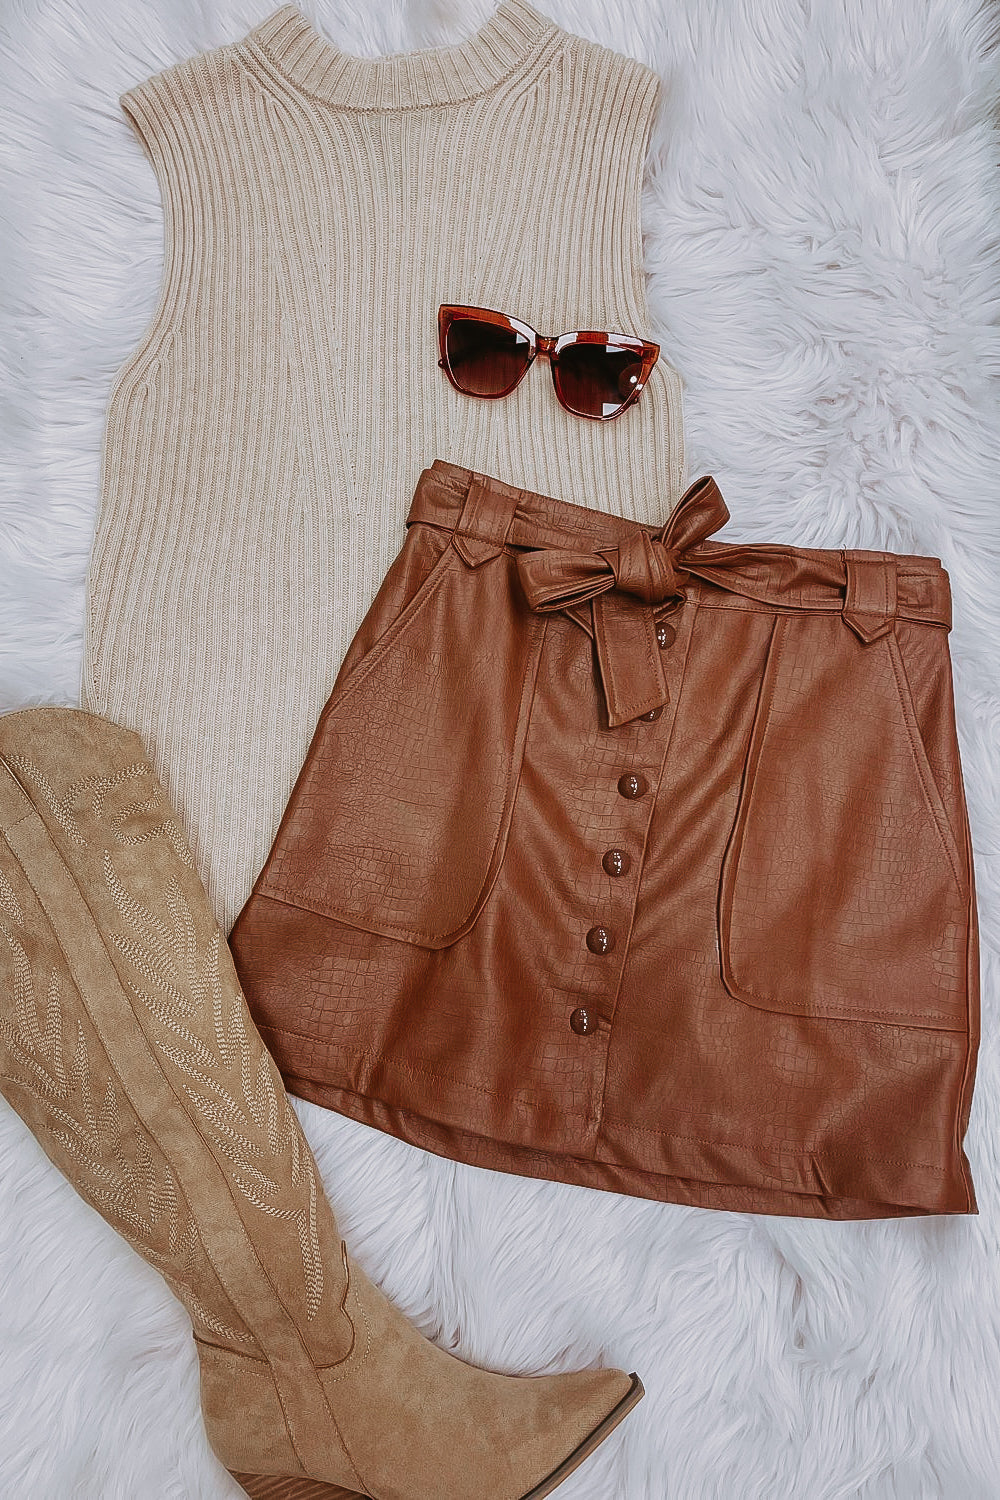 The Tiger Lily Brown Faux Leather Mini Skirt